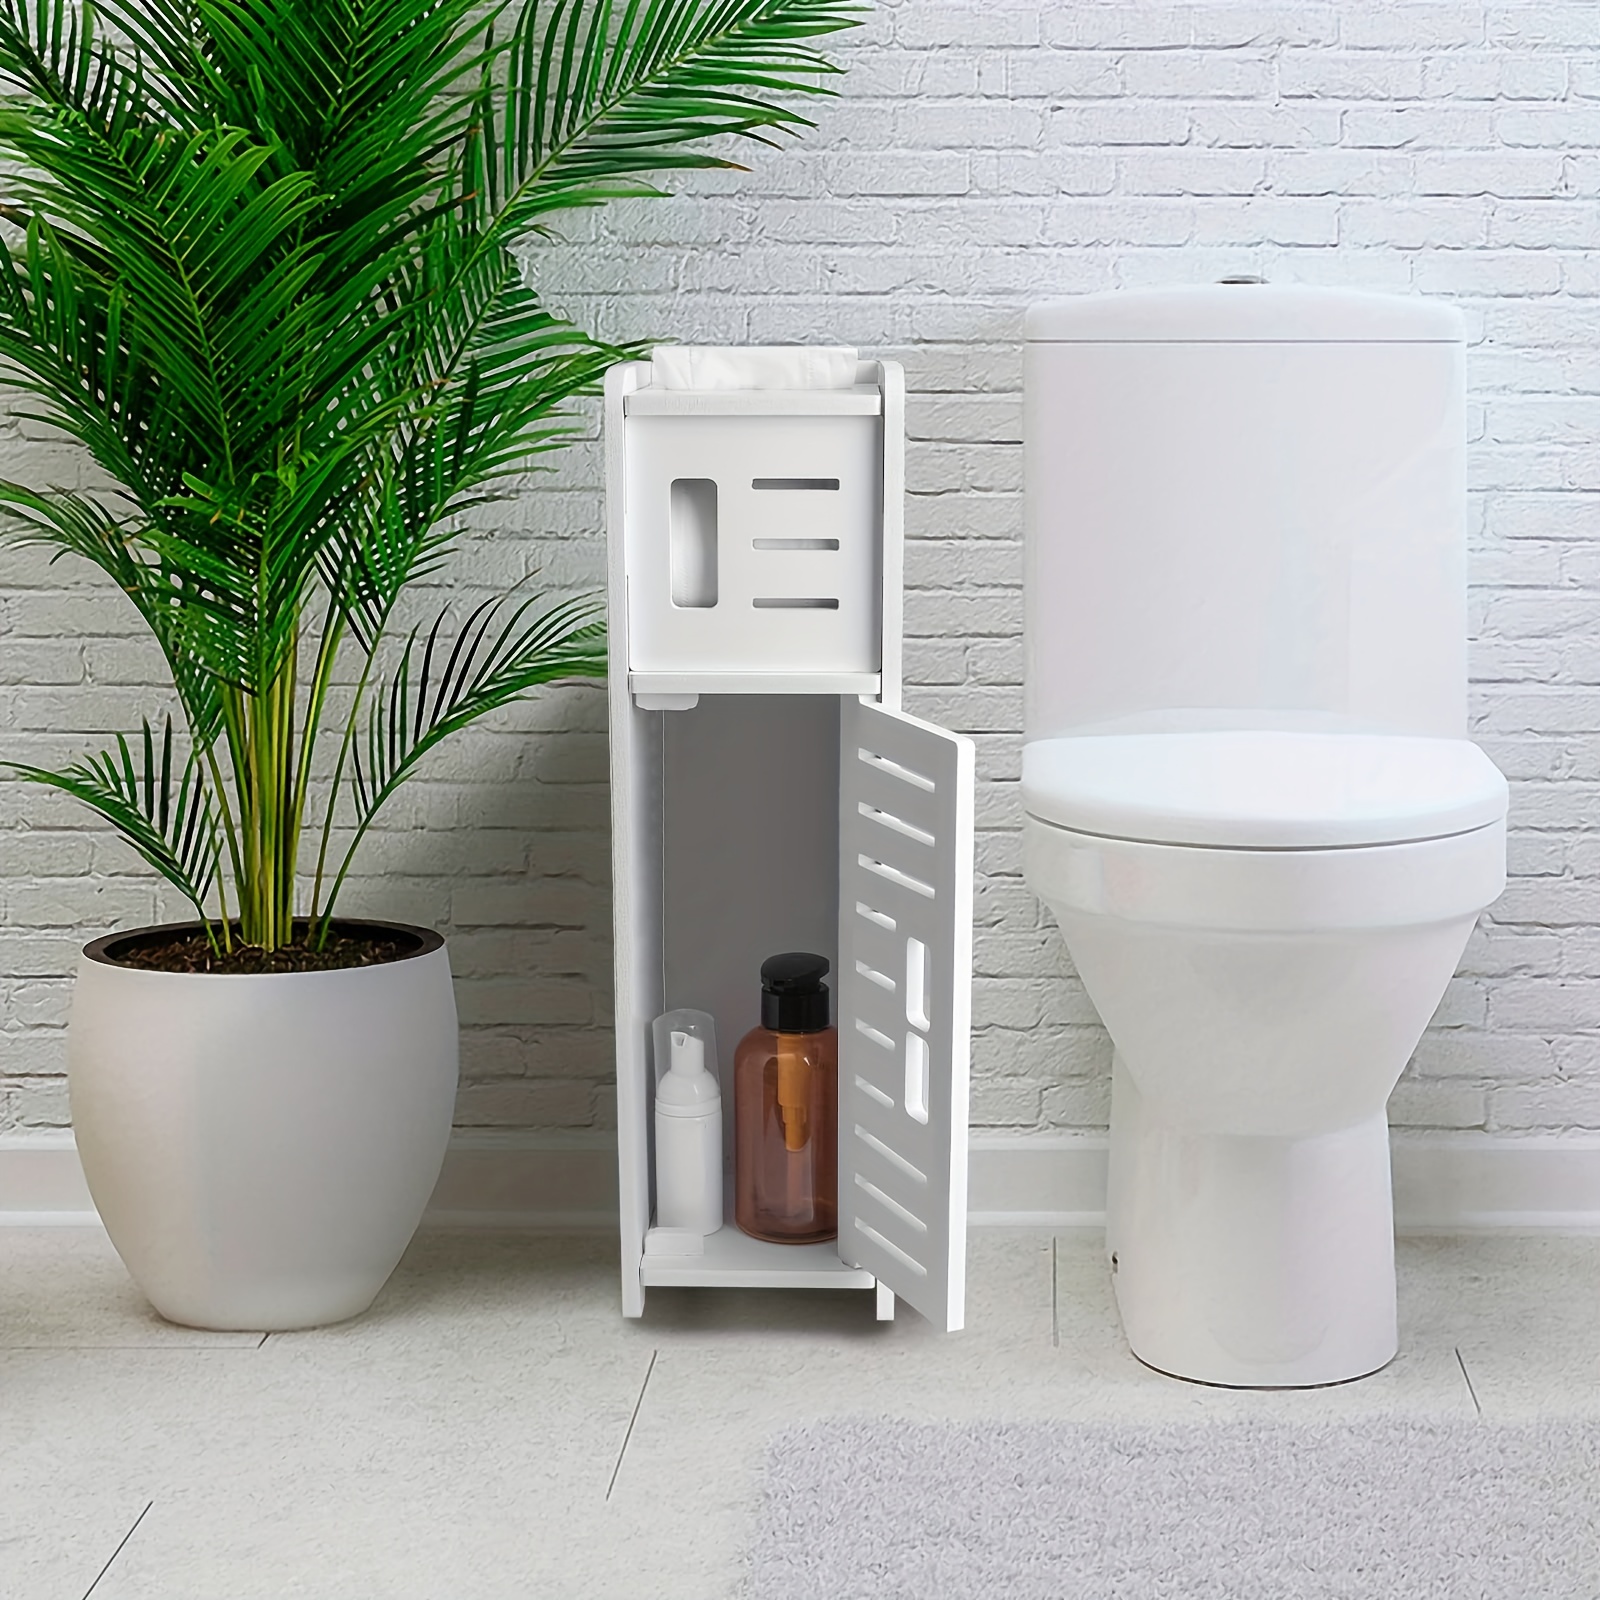 Toilet Paper Holder Stand,Small Bathroom Storage Cabinet for Toilet Paper Storage, Toilet Paper Stand Waterproof for Small Spaces by Aojezor 